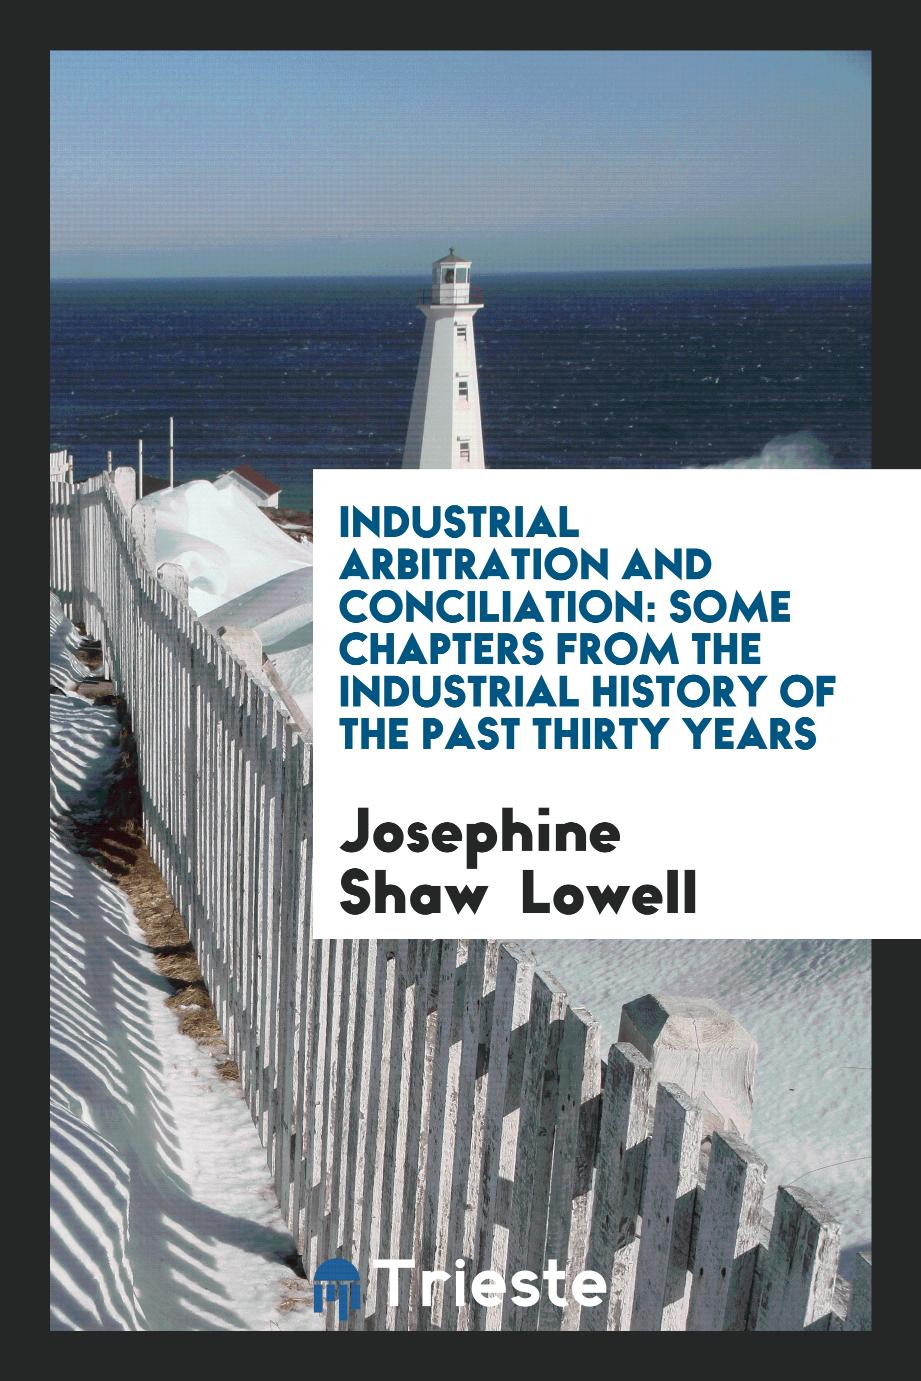 Industrial Arbitration and Conciliation: Some Chapters from the Industrial History of the past Thirty Years